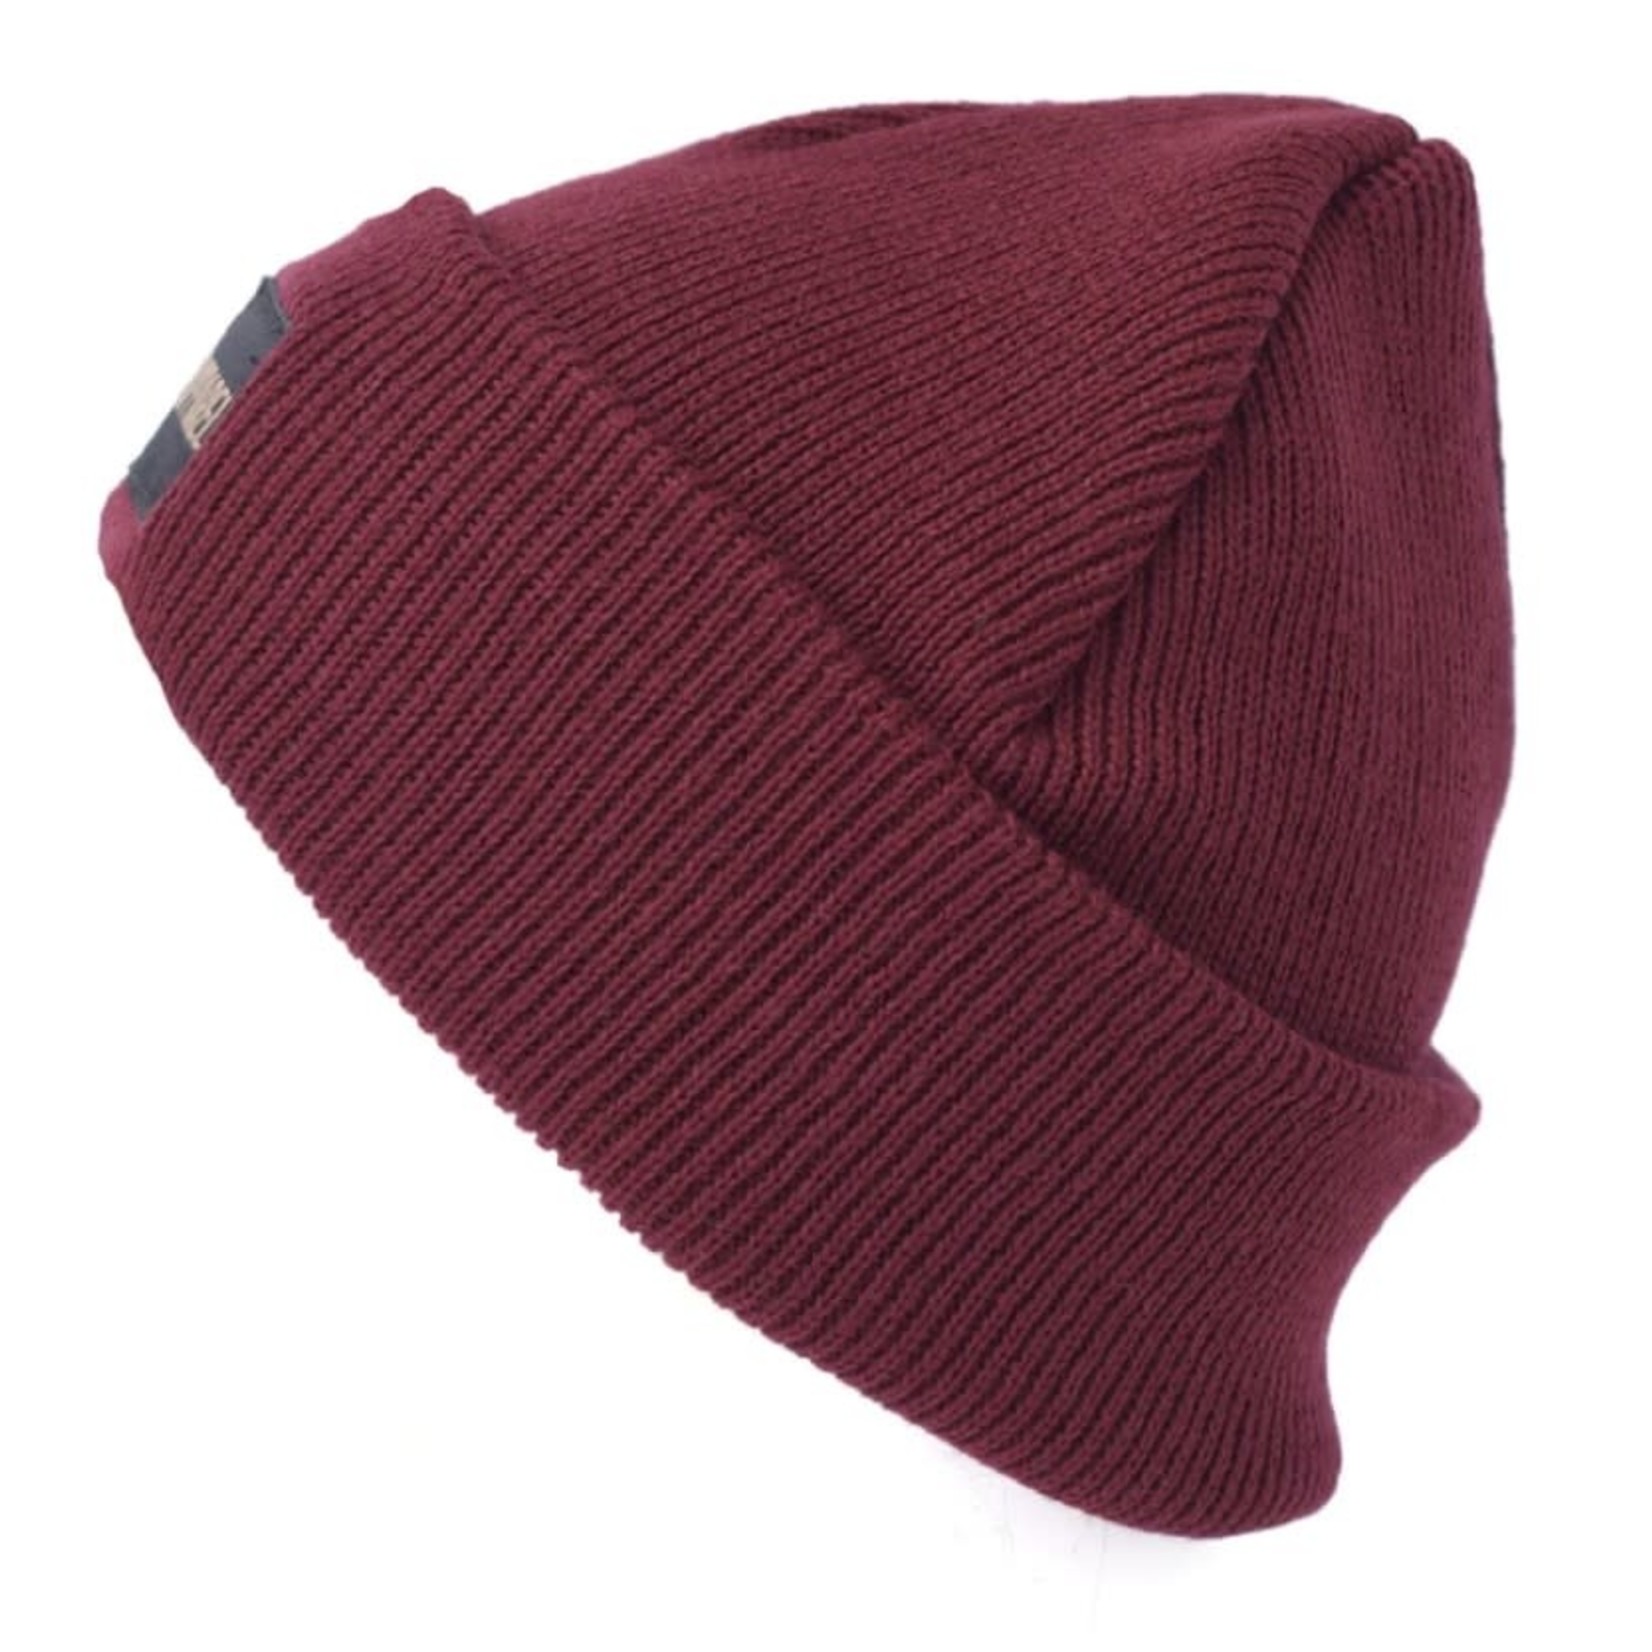 L&P L&P - Knit Hat for the Fall - 'Newport 6.0/ Burgundy City'